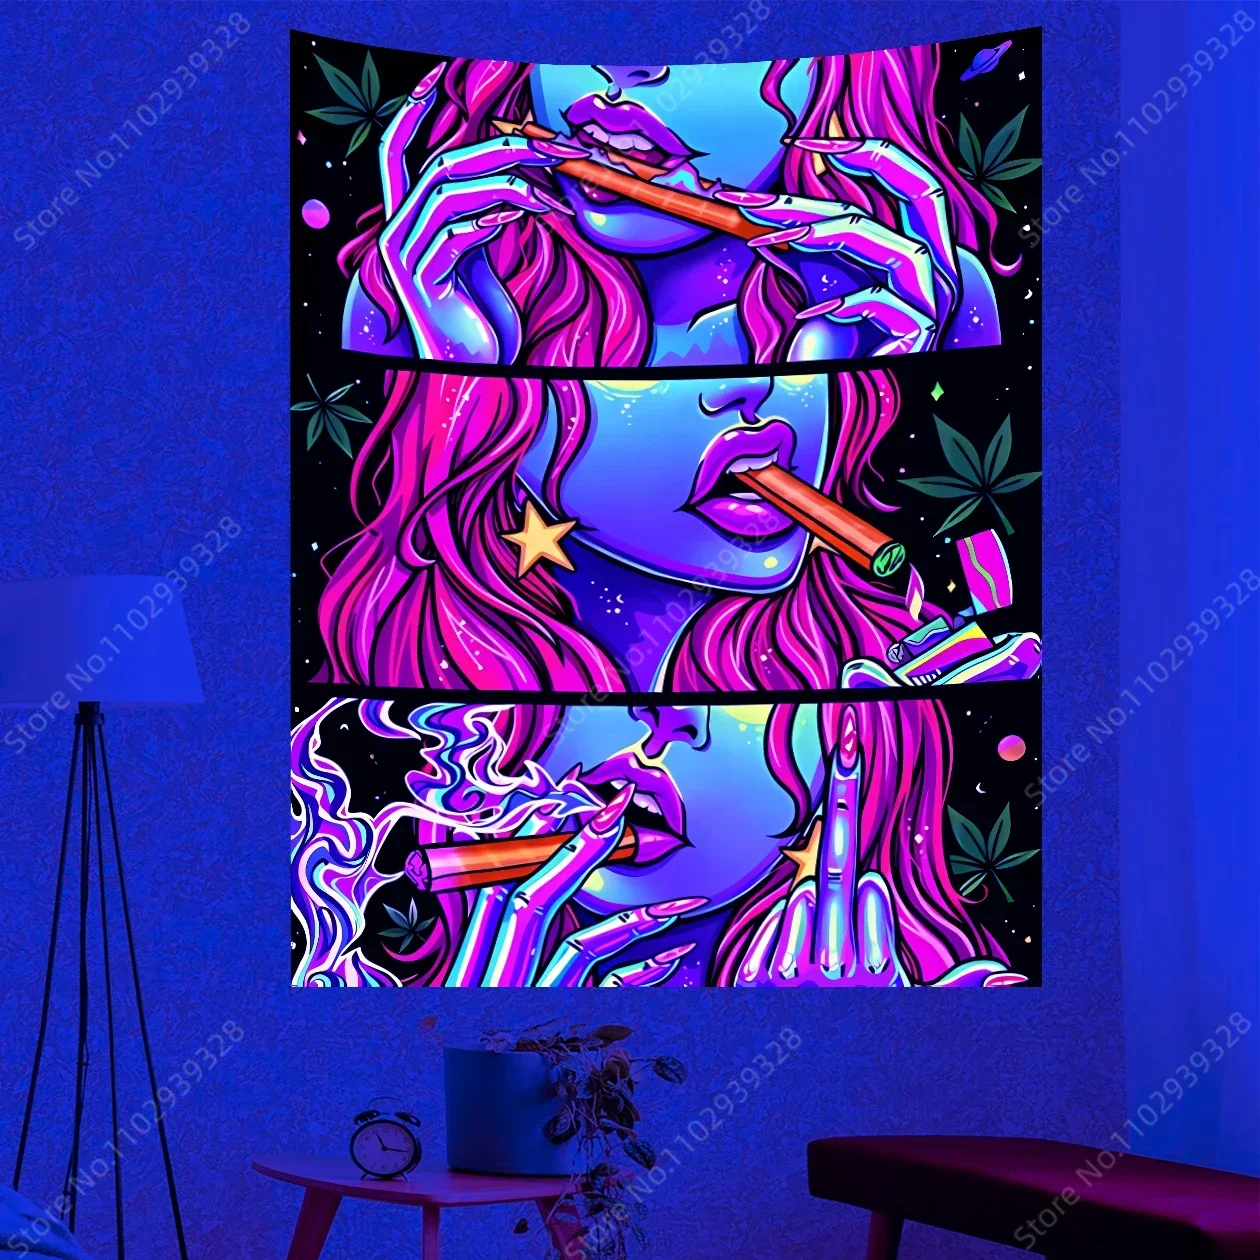 

Cool Smoking Girl UV Reactive Tapestry Hippie Psychedelic Tapestries Art Aesthetic Kawaii Wall Hanging Bedroom Decor Party Decor